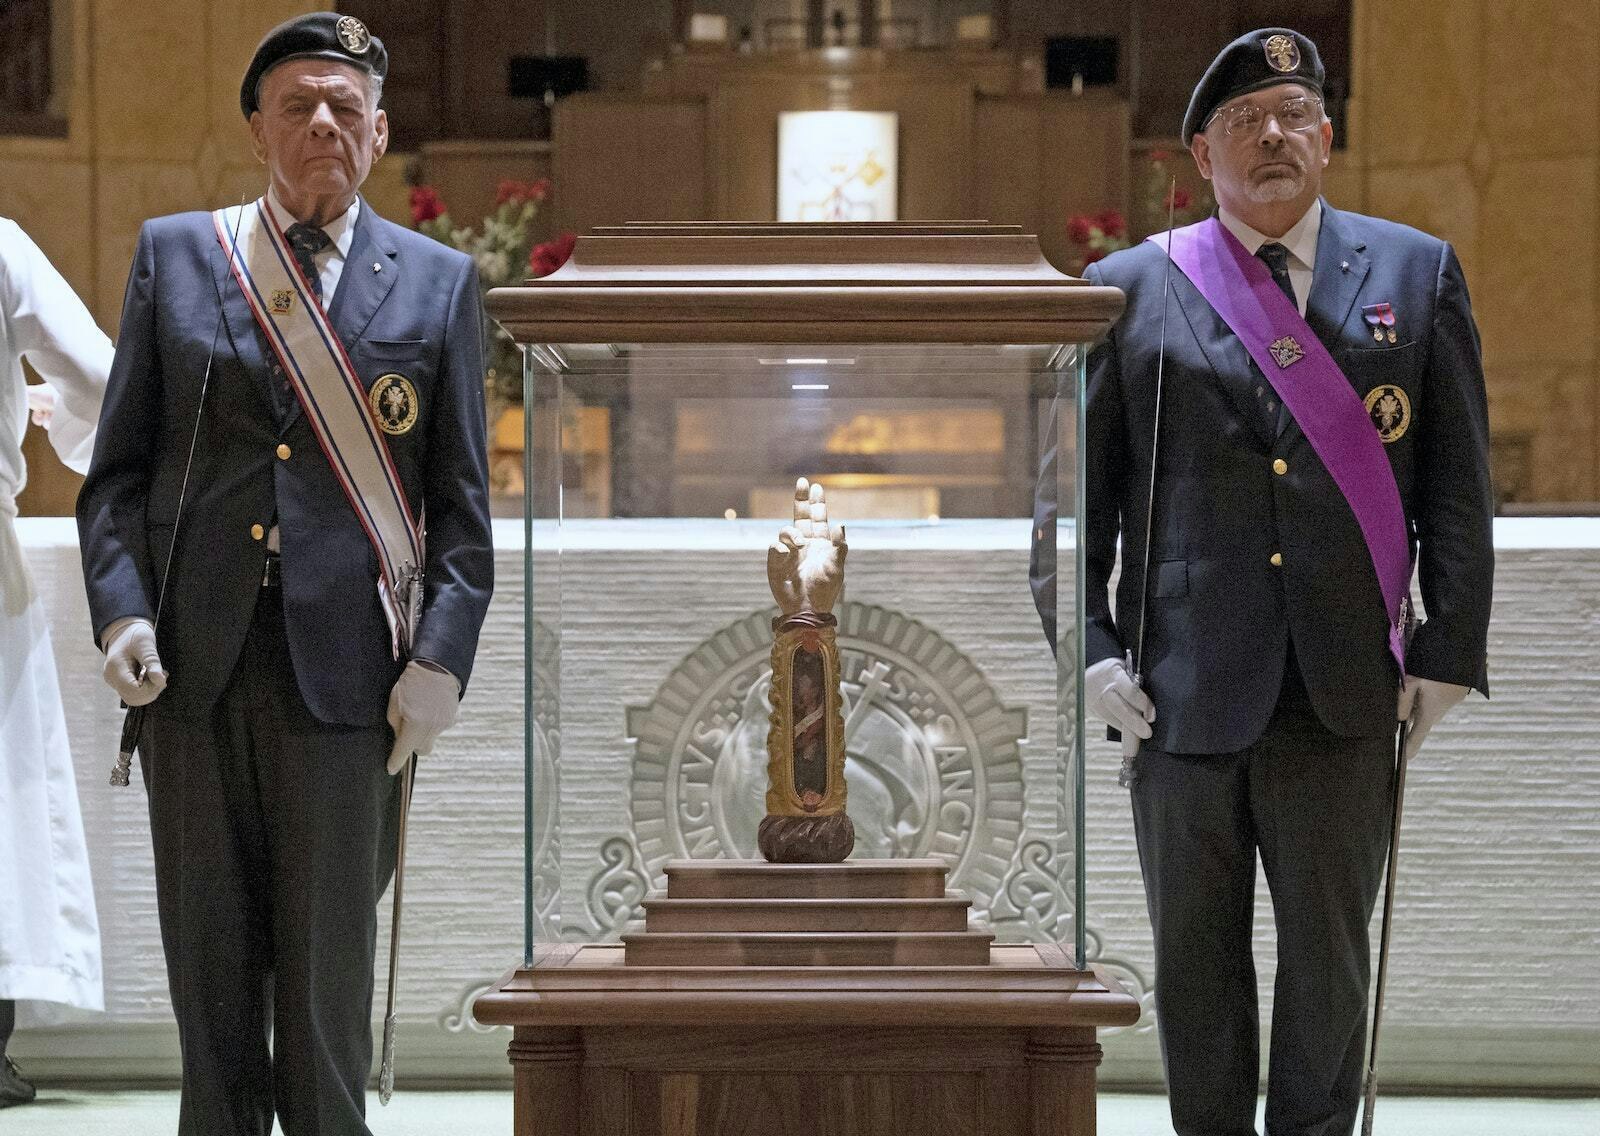 Fourth-degree Knights of Columbus stand watch over the relic of St. Jude at the National Shrine of the Little Flower Basilica in Royal Oak on Oct. 13. The tour is sponsored by Treasures of the Church, an apostolate run by a Detroit-area priest, Fr. Carlos Martins, CC.